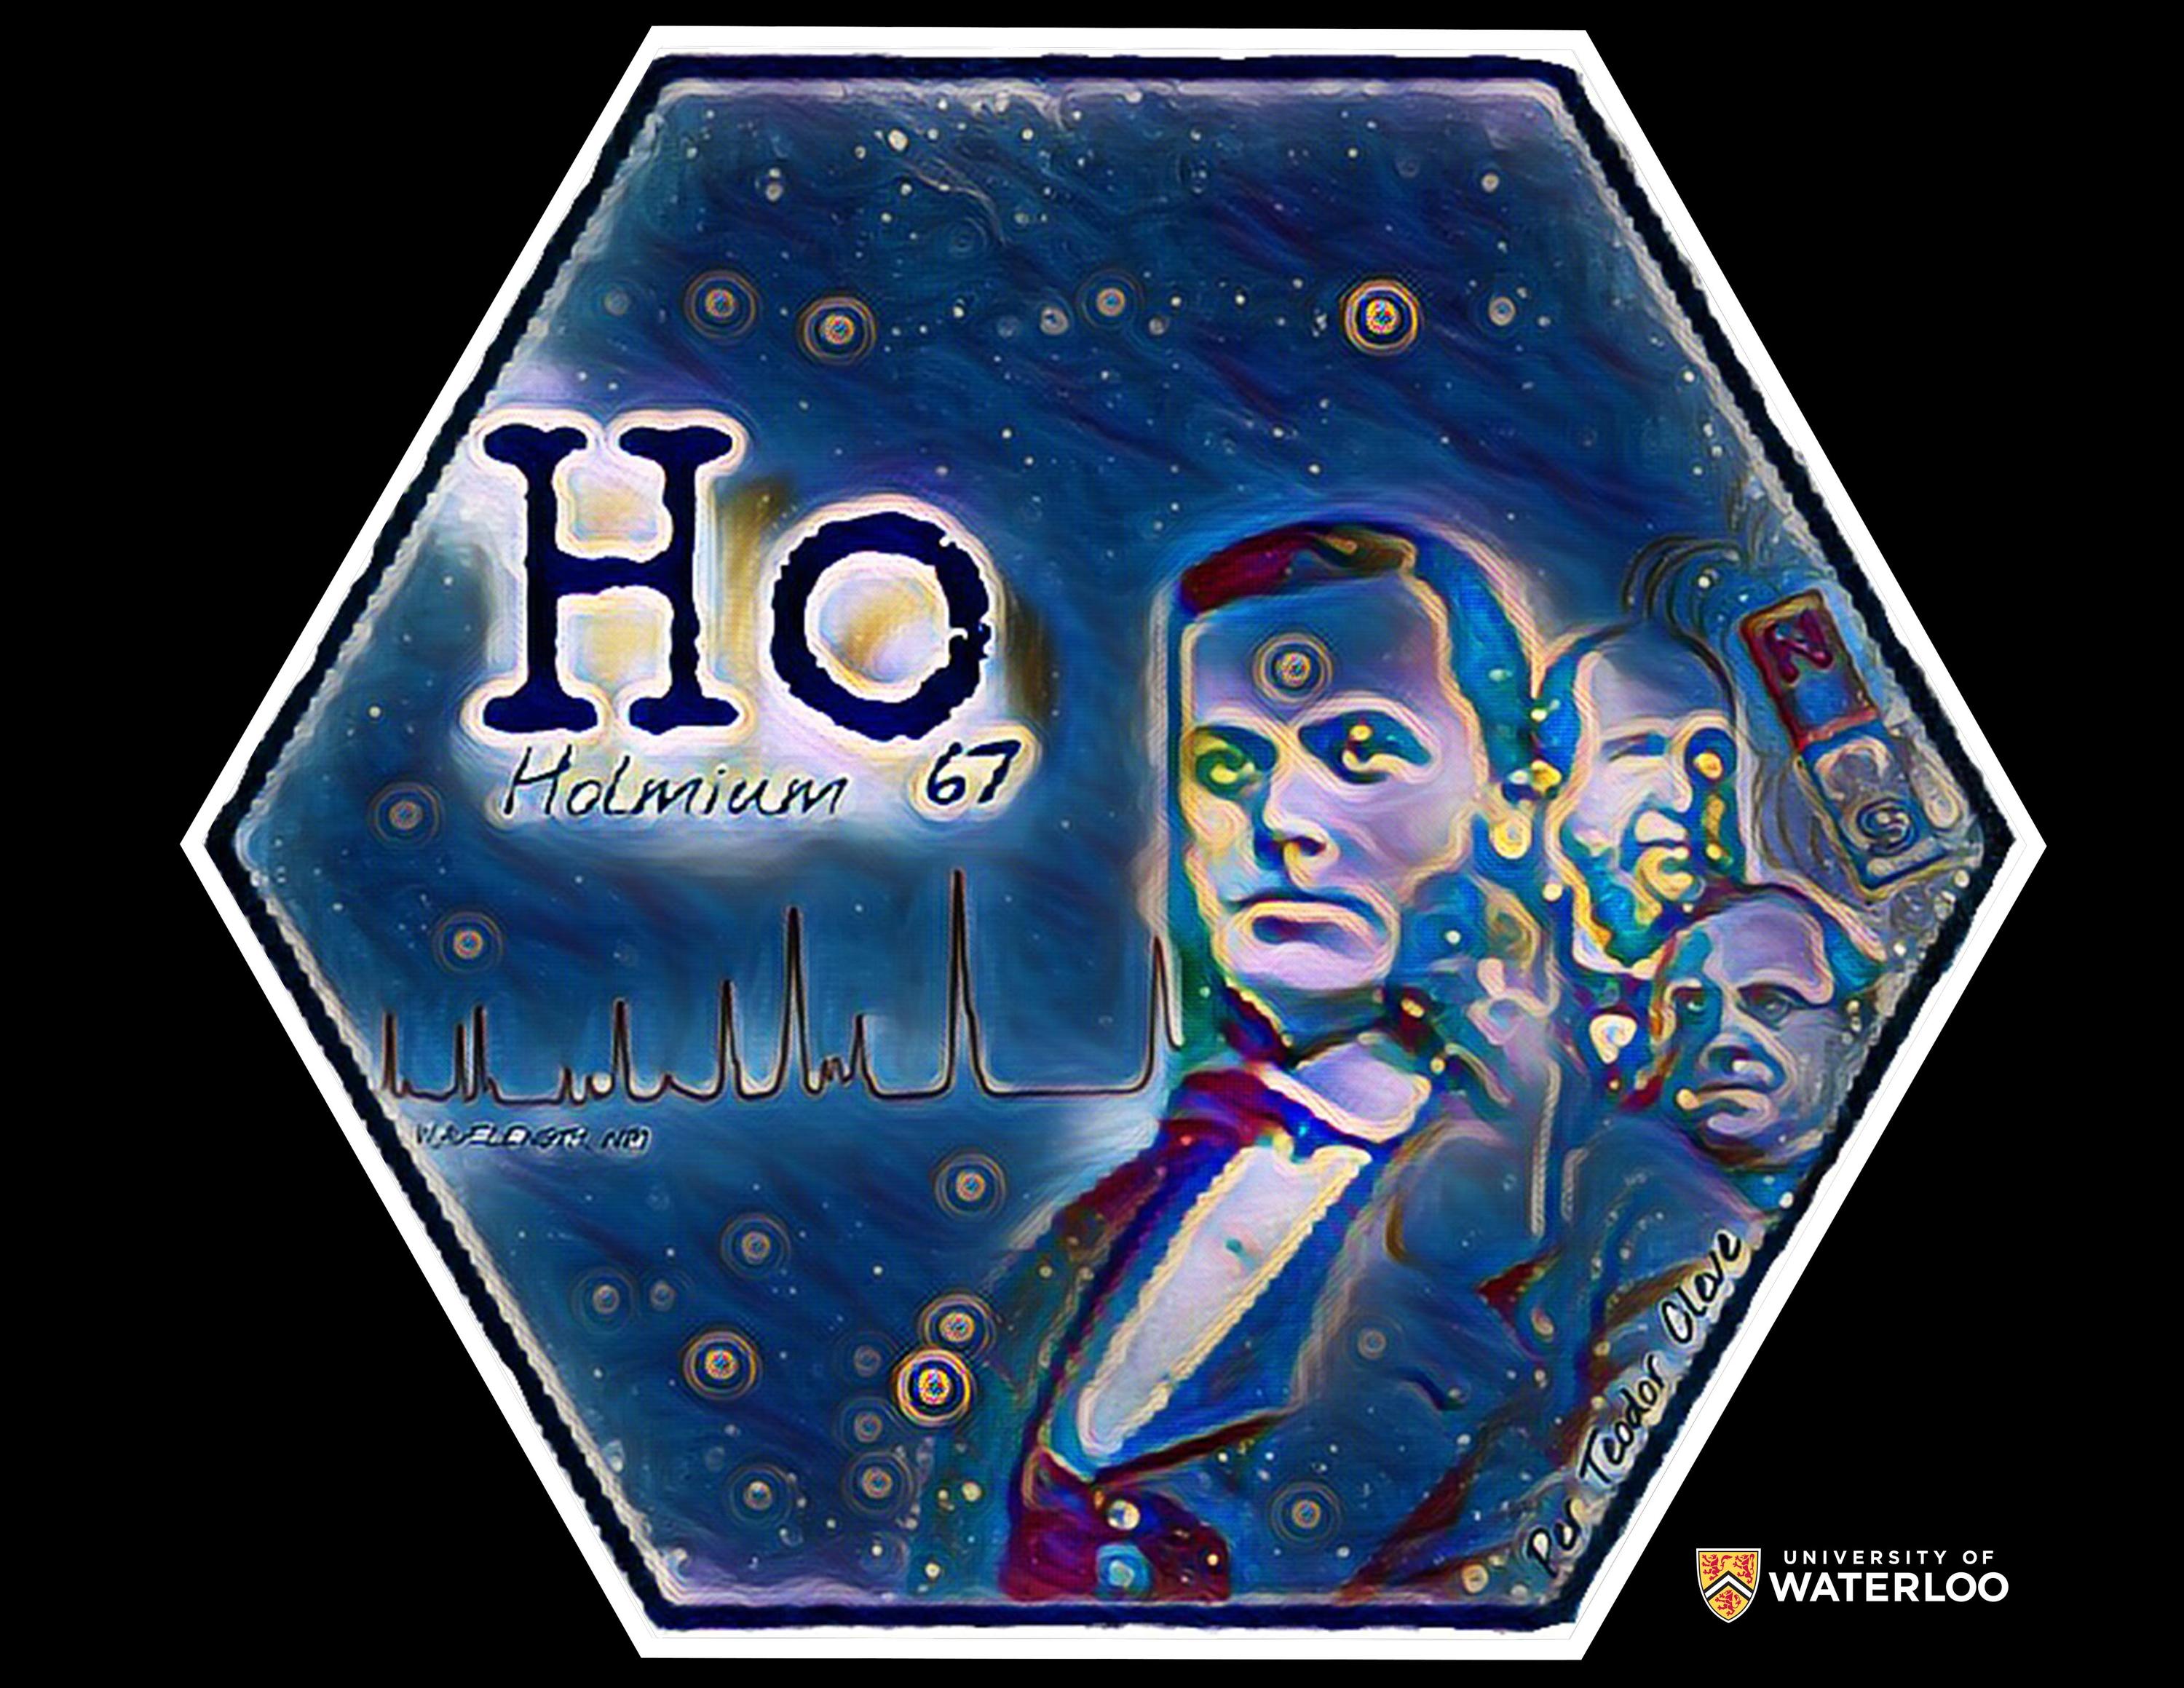 Acrylic on dark blue background. In the upper left corner, chemical symbol “Ho”, “Holmium”, and atomic number “67” highlighted in white. An absorption spectra of the element across the centre leads to a composite portrait of Swidish Per Teodor Cleve and two other chemists. Behind them is a magnet with magnetic field lines. Miniature atomic Bohr models in white and yellow appear like bubbles across the tile.